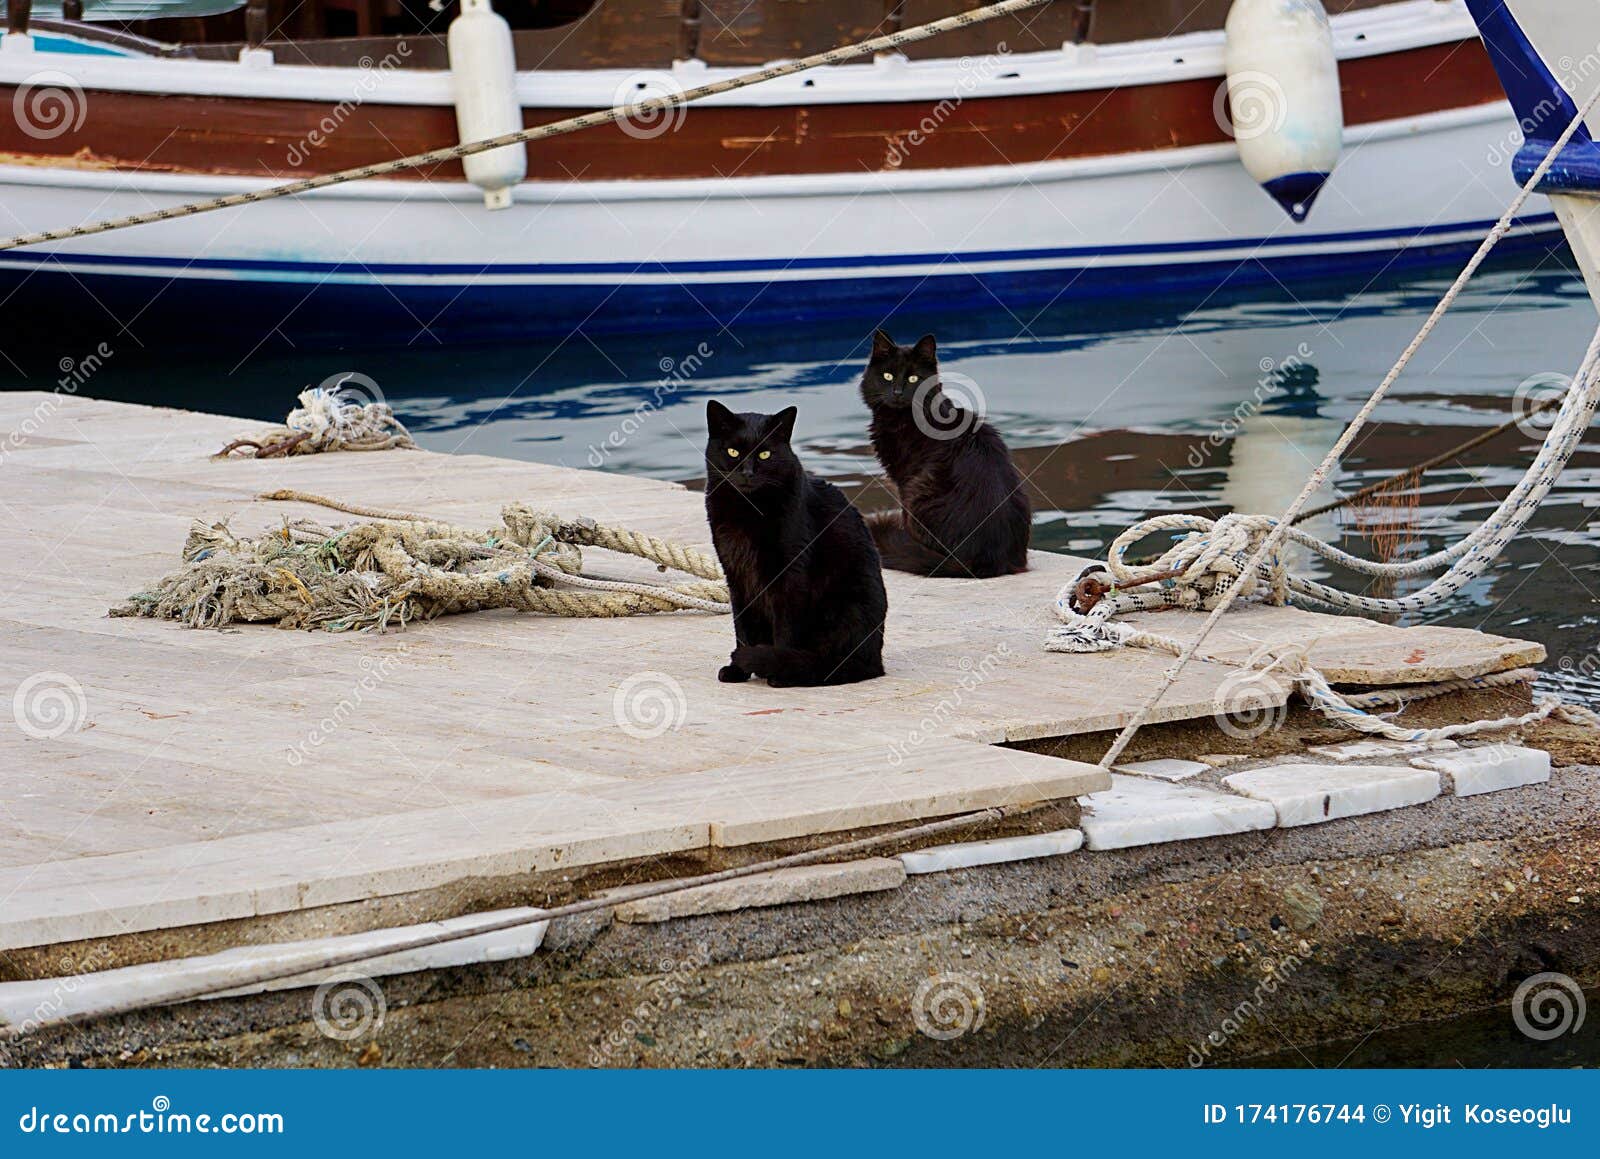 two black cats on a pier